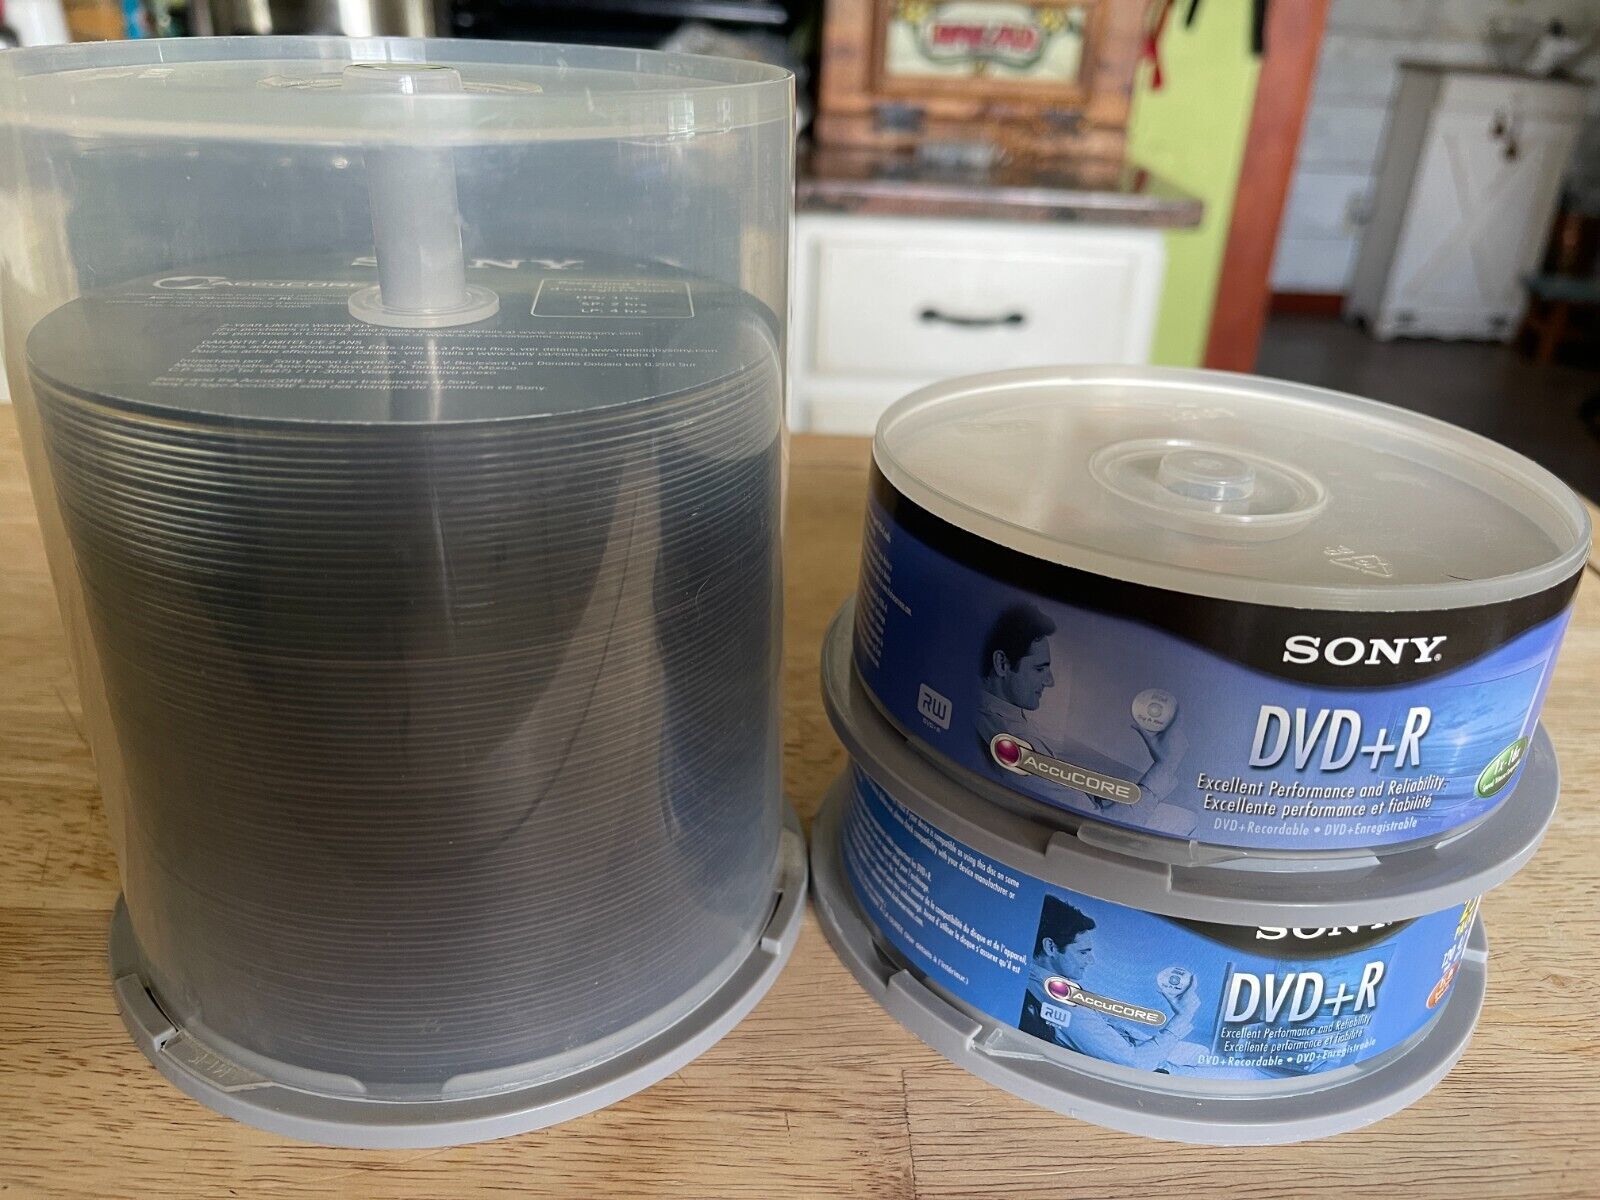 Sony DVD-R - Pack of 138 - 120min 4.7GB 1-16x Recordable Discs - New Open Box